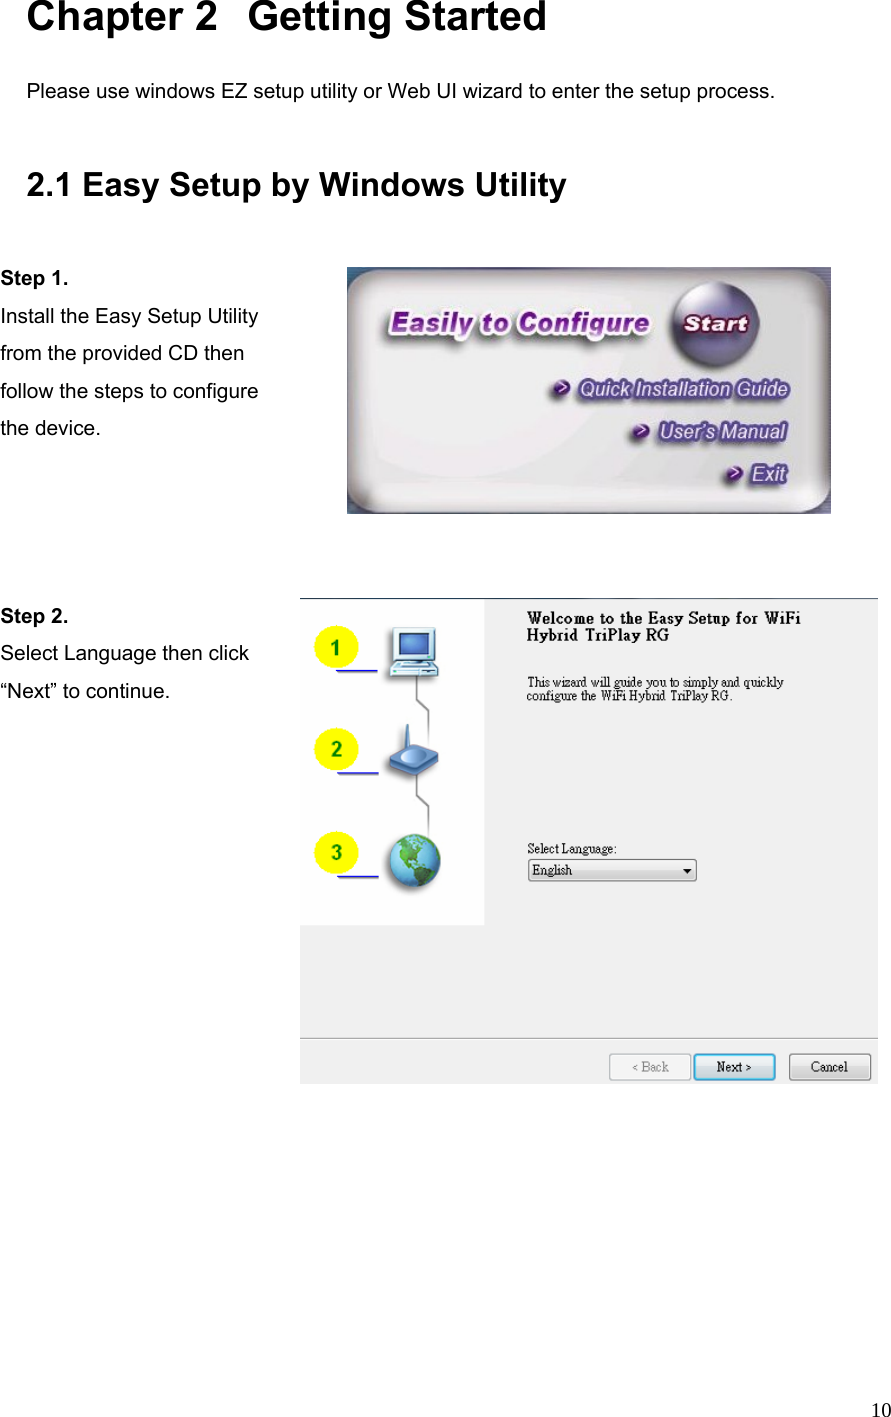  10 Chapter 2   Getting Started Please use windows EZ setup utility or Web UI wizard to enter the setup process.      2.1 Easy Setup by Windows Utility    Step 1.   Install the Easy Setup Utility from the provided CD then follow the steps to configure the device.     Step 2.   Select Language then click “Next” to continue. 